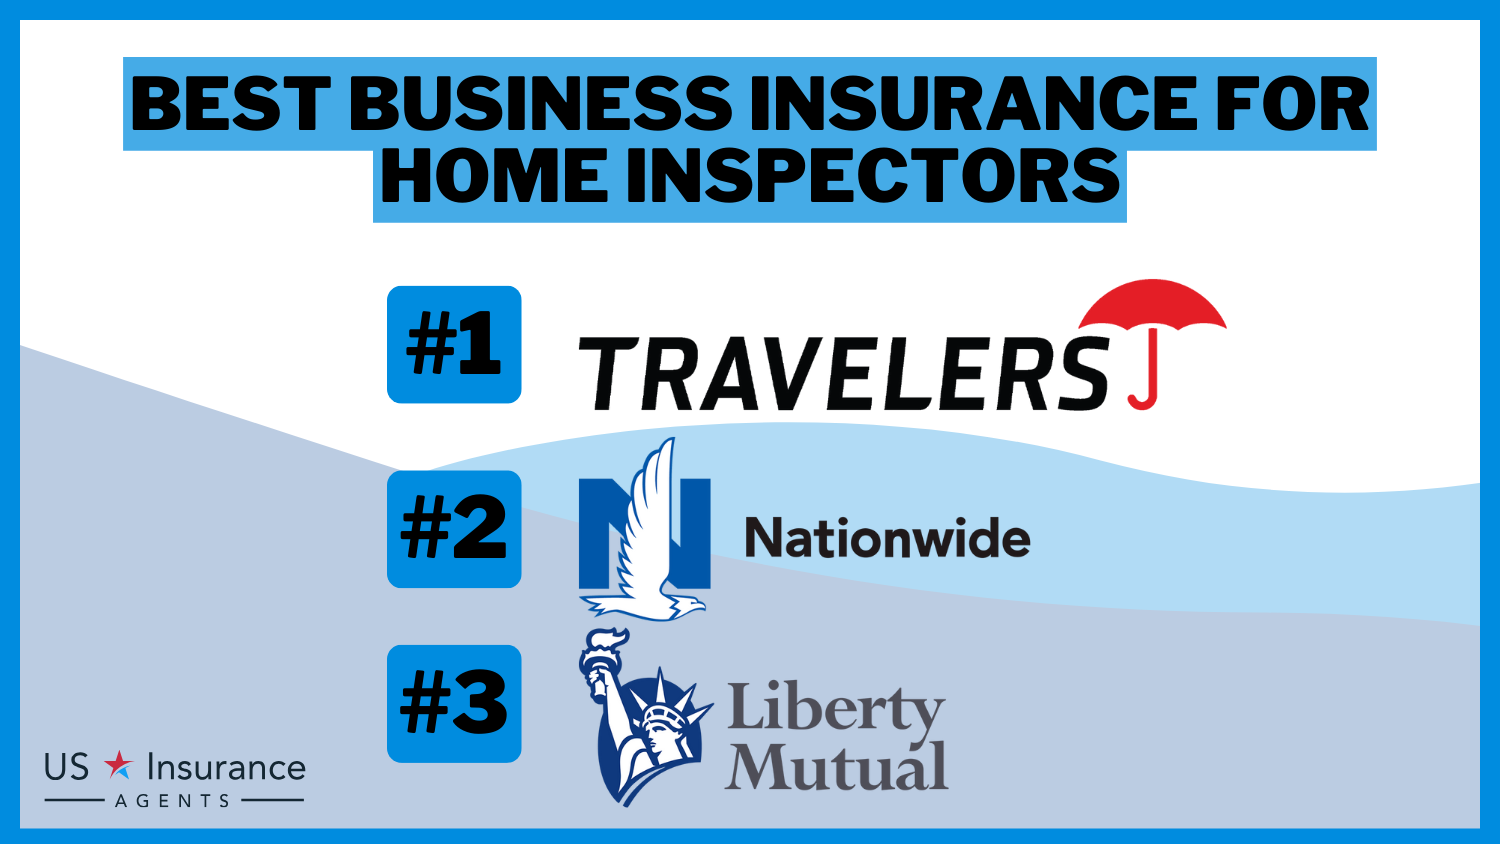 Best Business Insurance for Home Inspectors: Travelers, Nationwide and Liberty Mutual